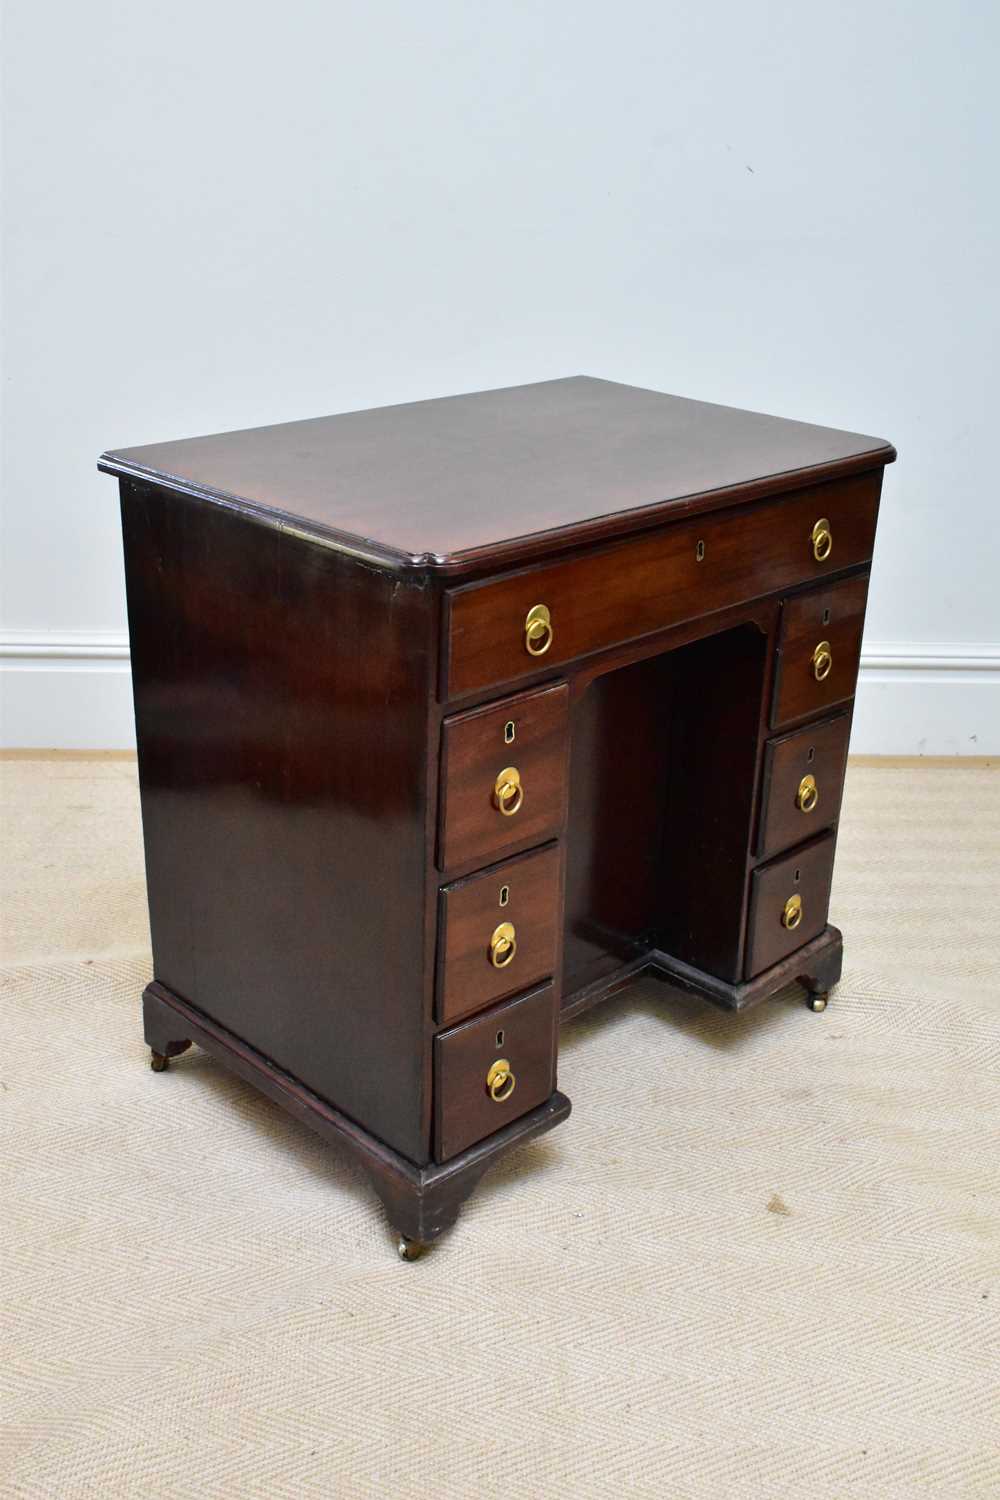 A George III mahogany kneehole desk, the seven drawers with later handles around a central